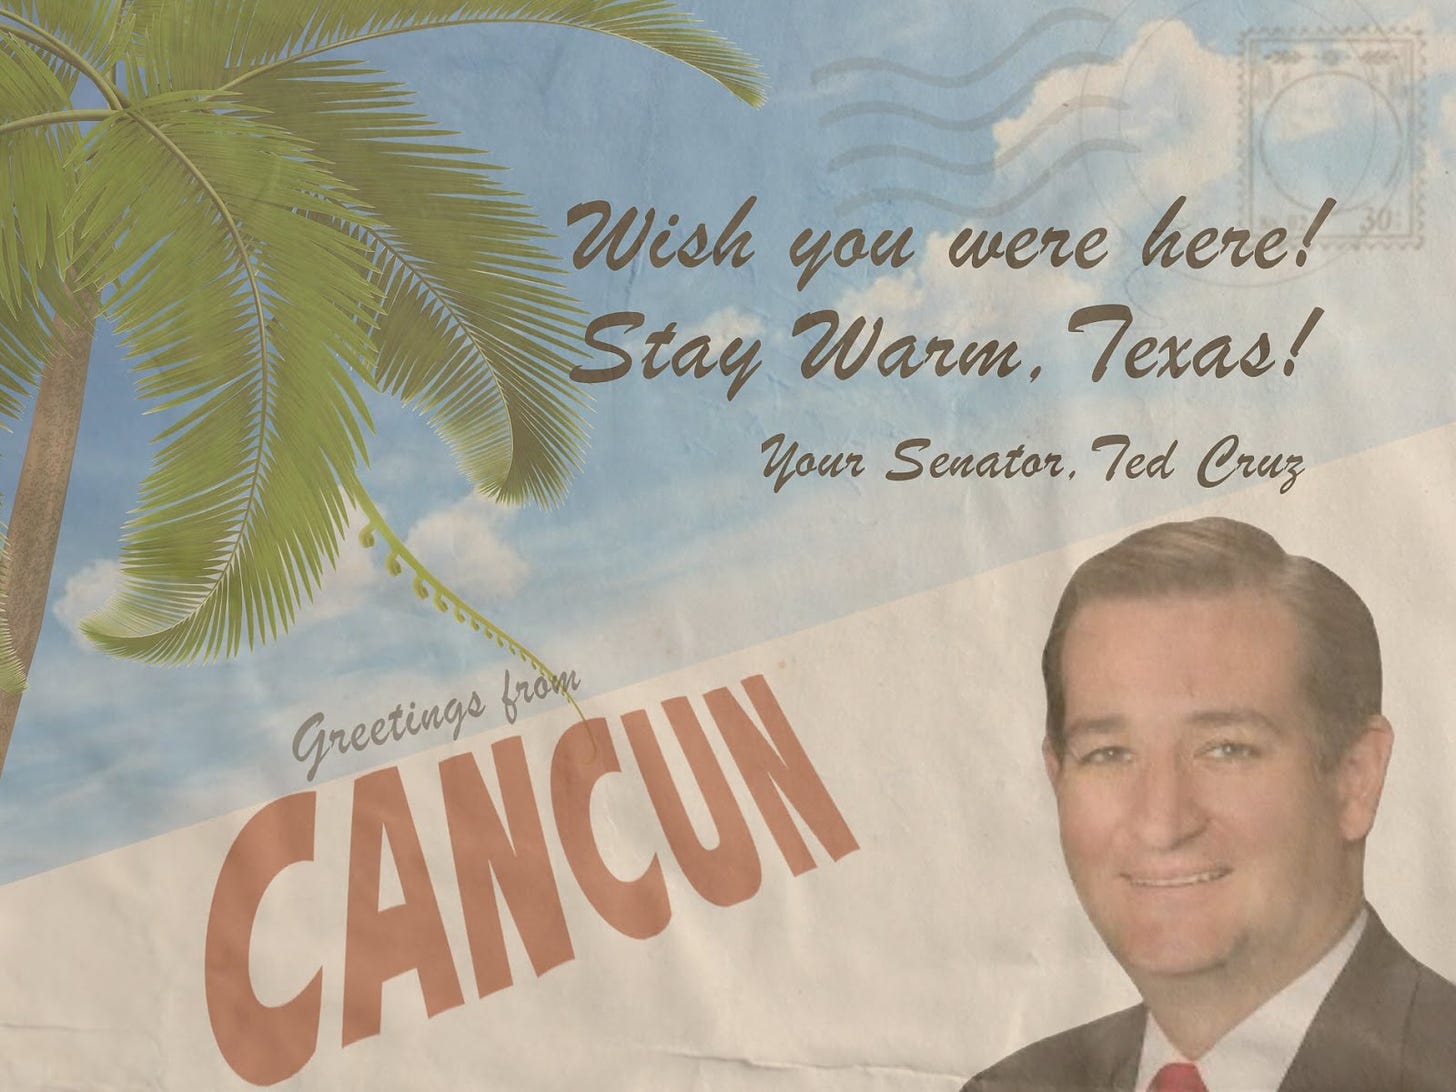 A faded postcard with a palm tree and a picture of a smiling Ted Cruz that says "Wish you were here. Stay warm, Texas! Your Senator, Ted Cruz." and a large "Greetings from Cancun"